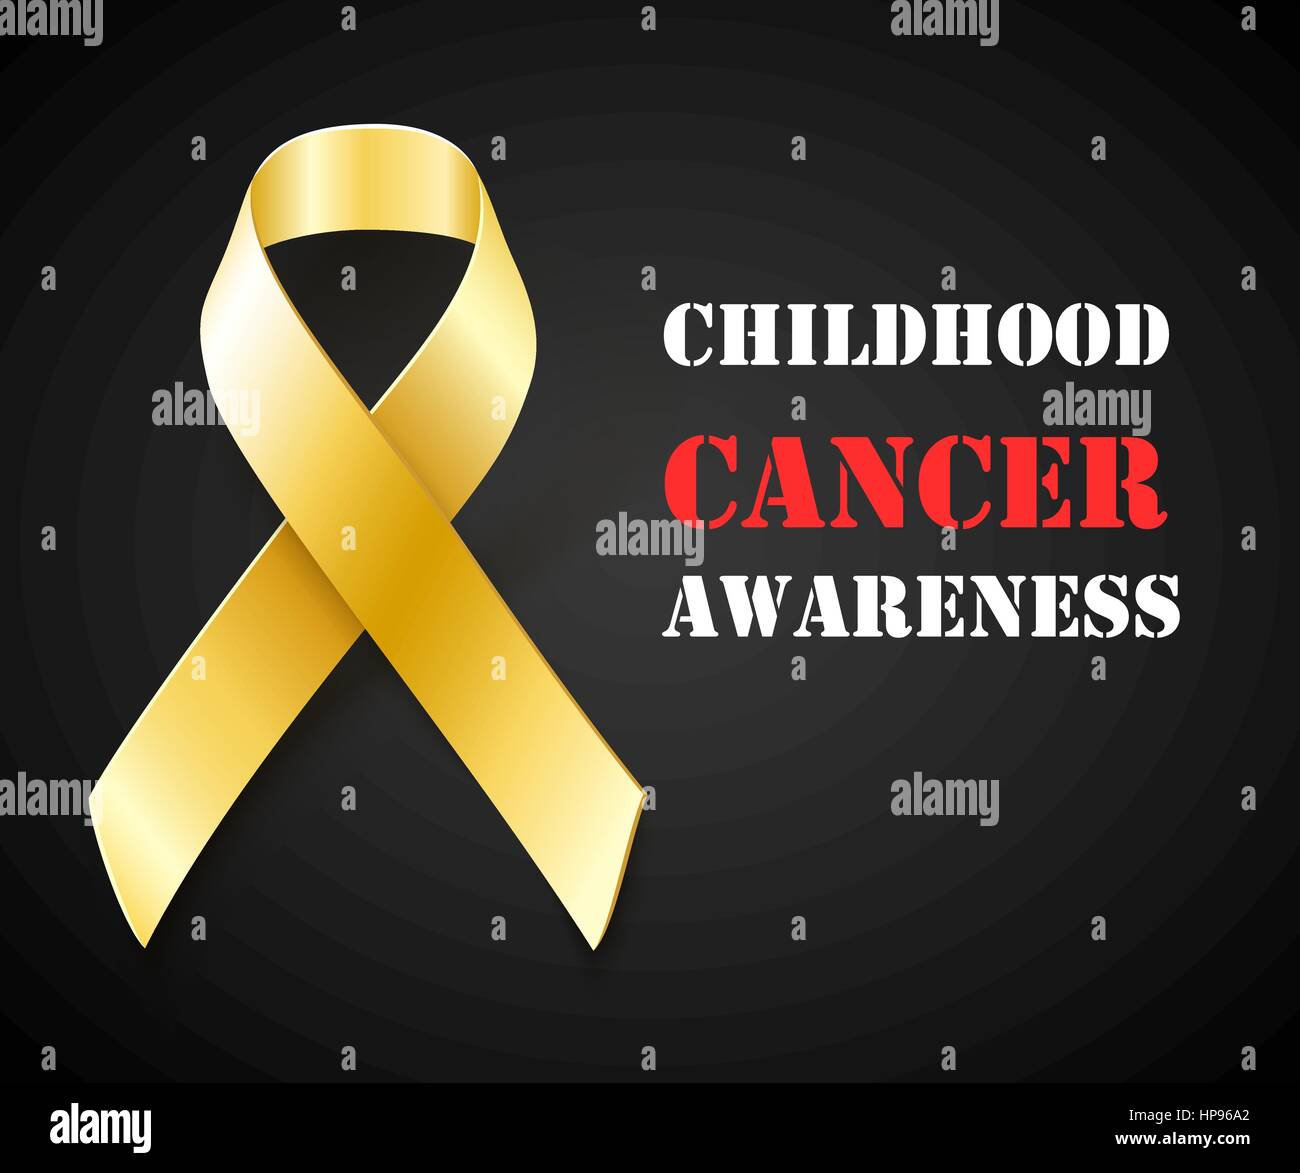 Childhood Cancer Awareness concept , black background with gold ribbon, vector illustration Stock Vector